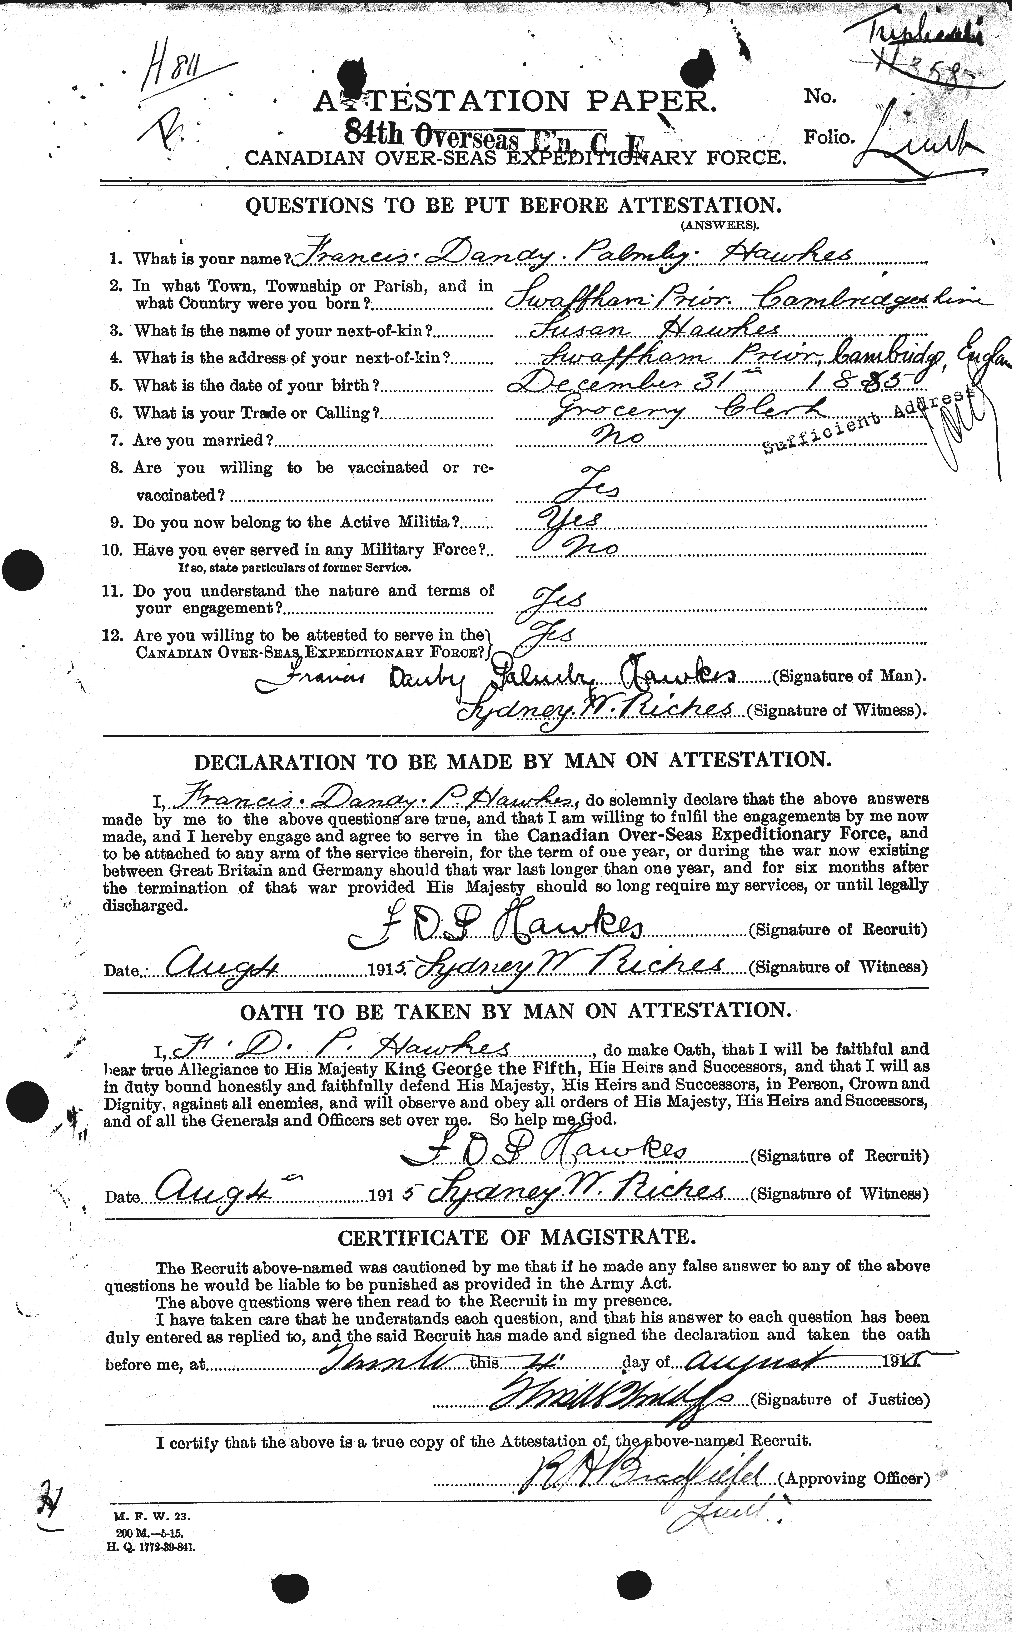 Personnel Records of the First World War - CEF 384524a